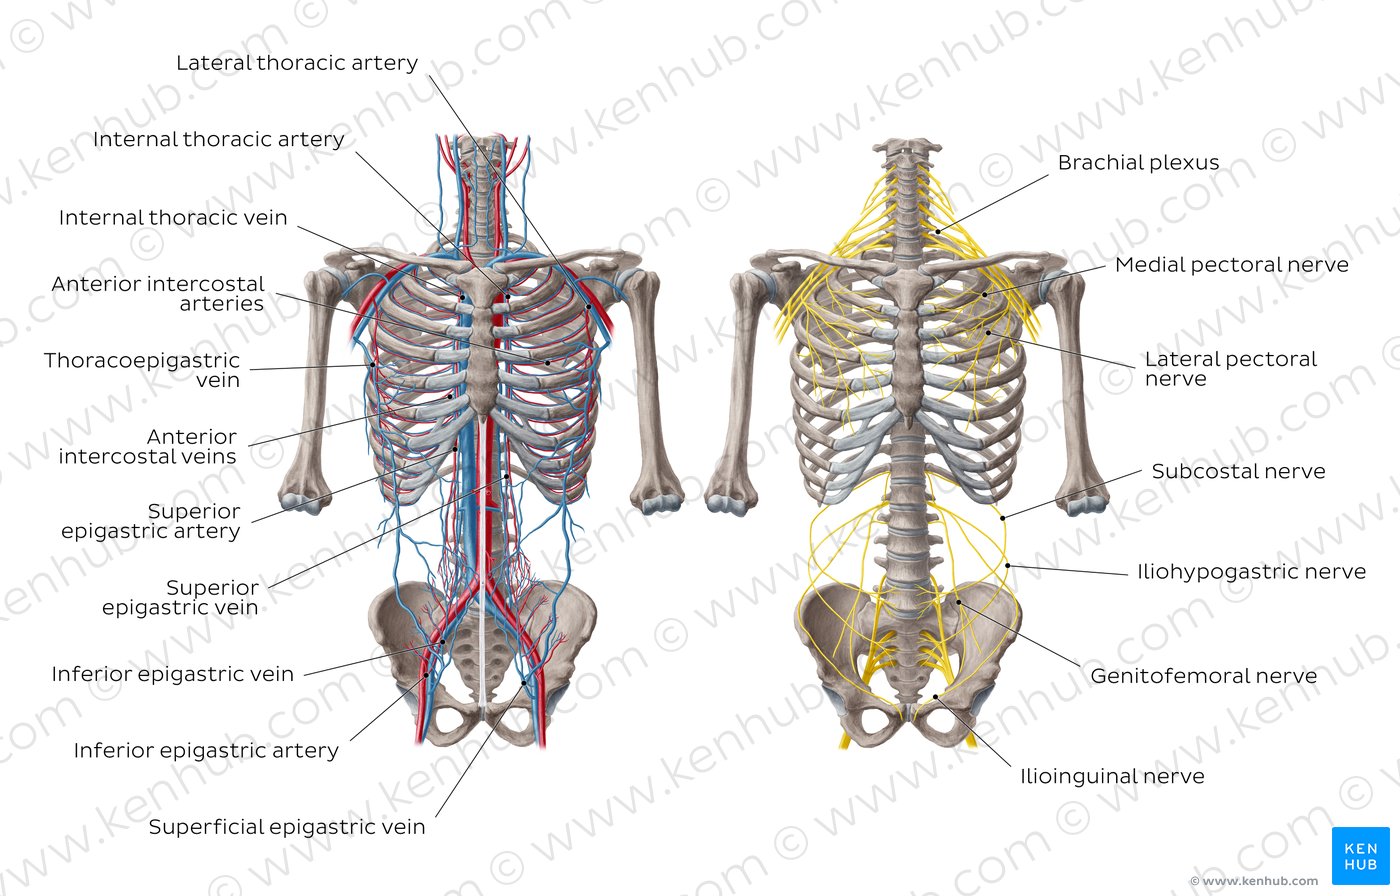 Nerves and vessels of the anterior thoracic wall